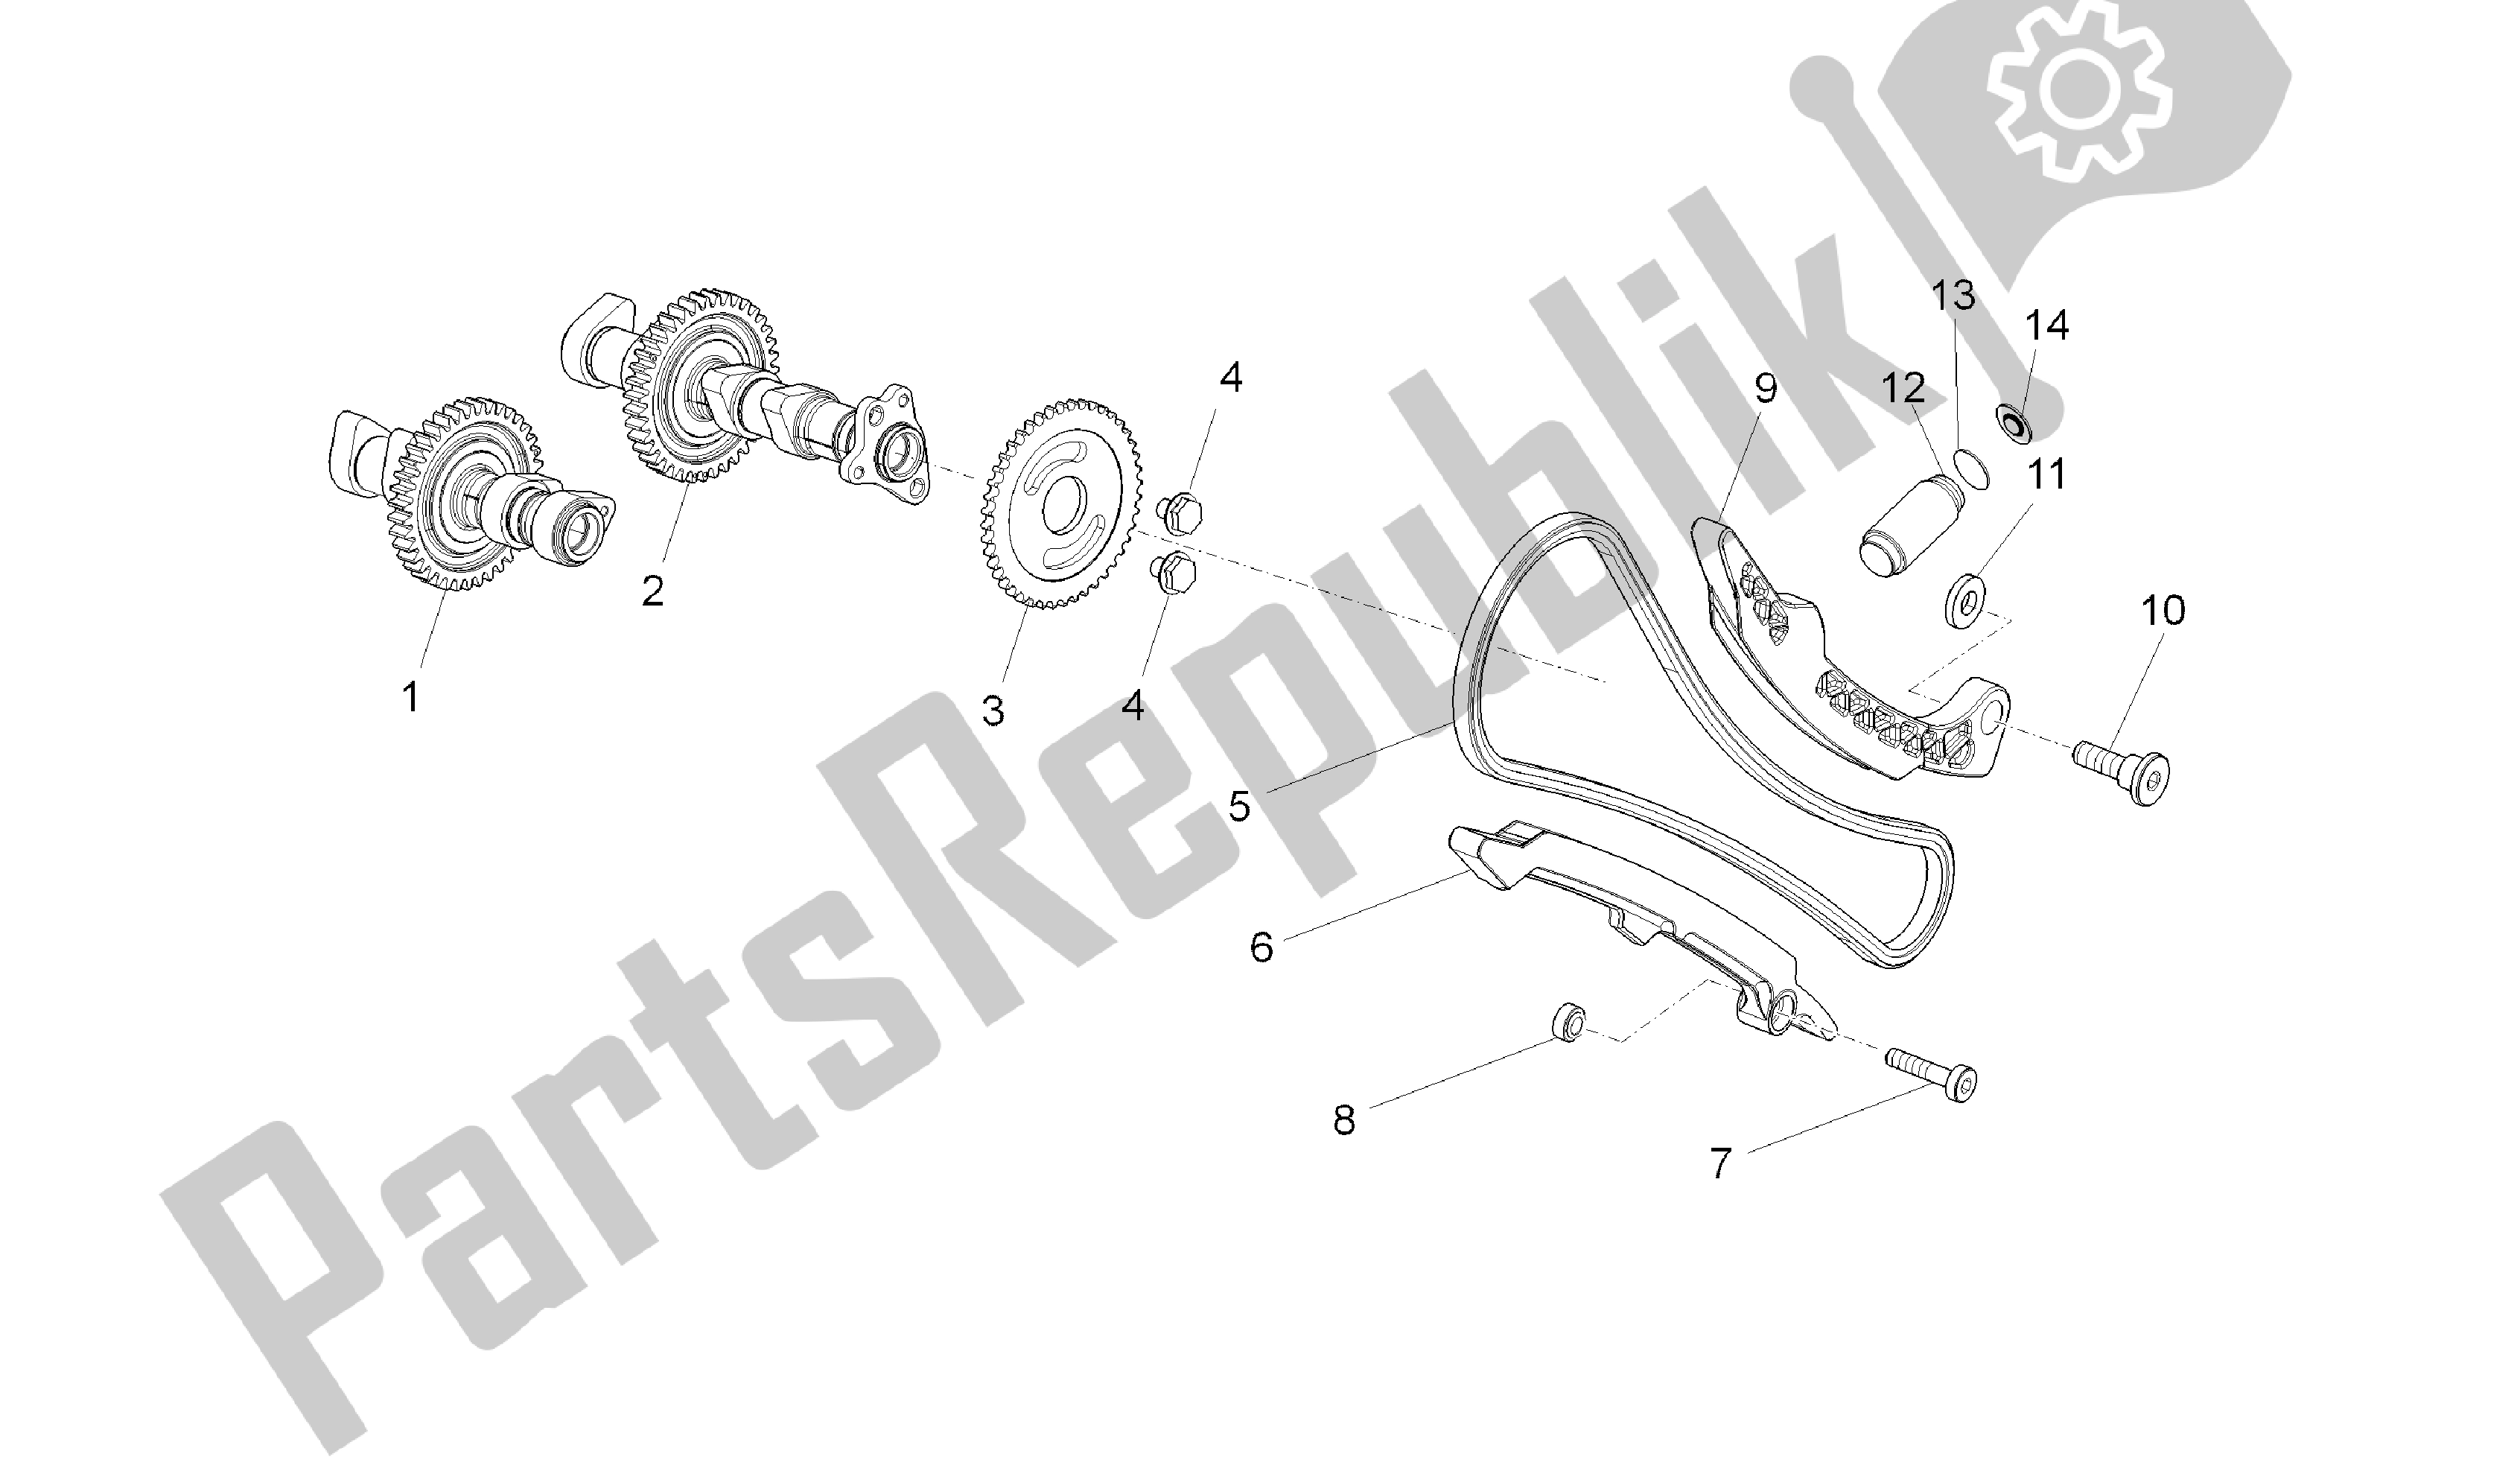 All parts for the Front Cylinder Timing System of the Aprilia RSV4 Aprc R ABS 3984 1000 2013